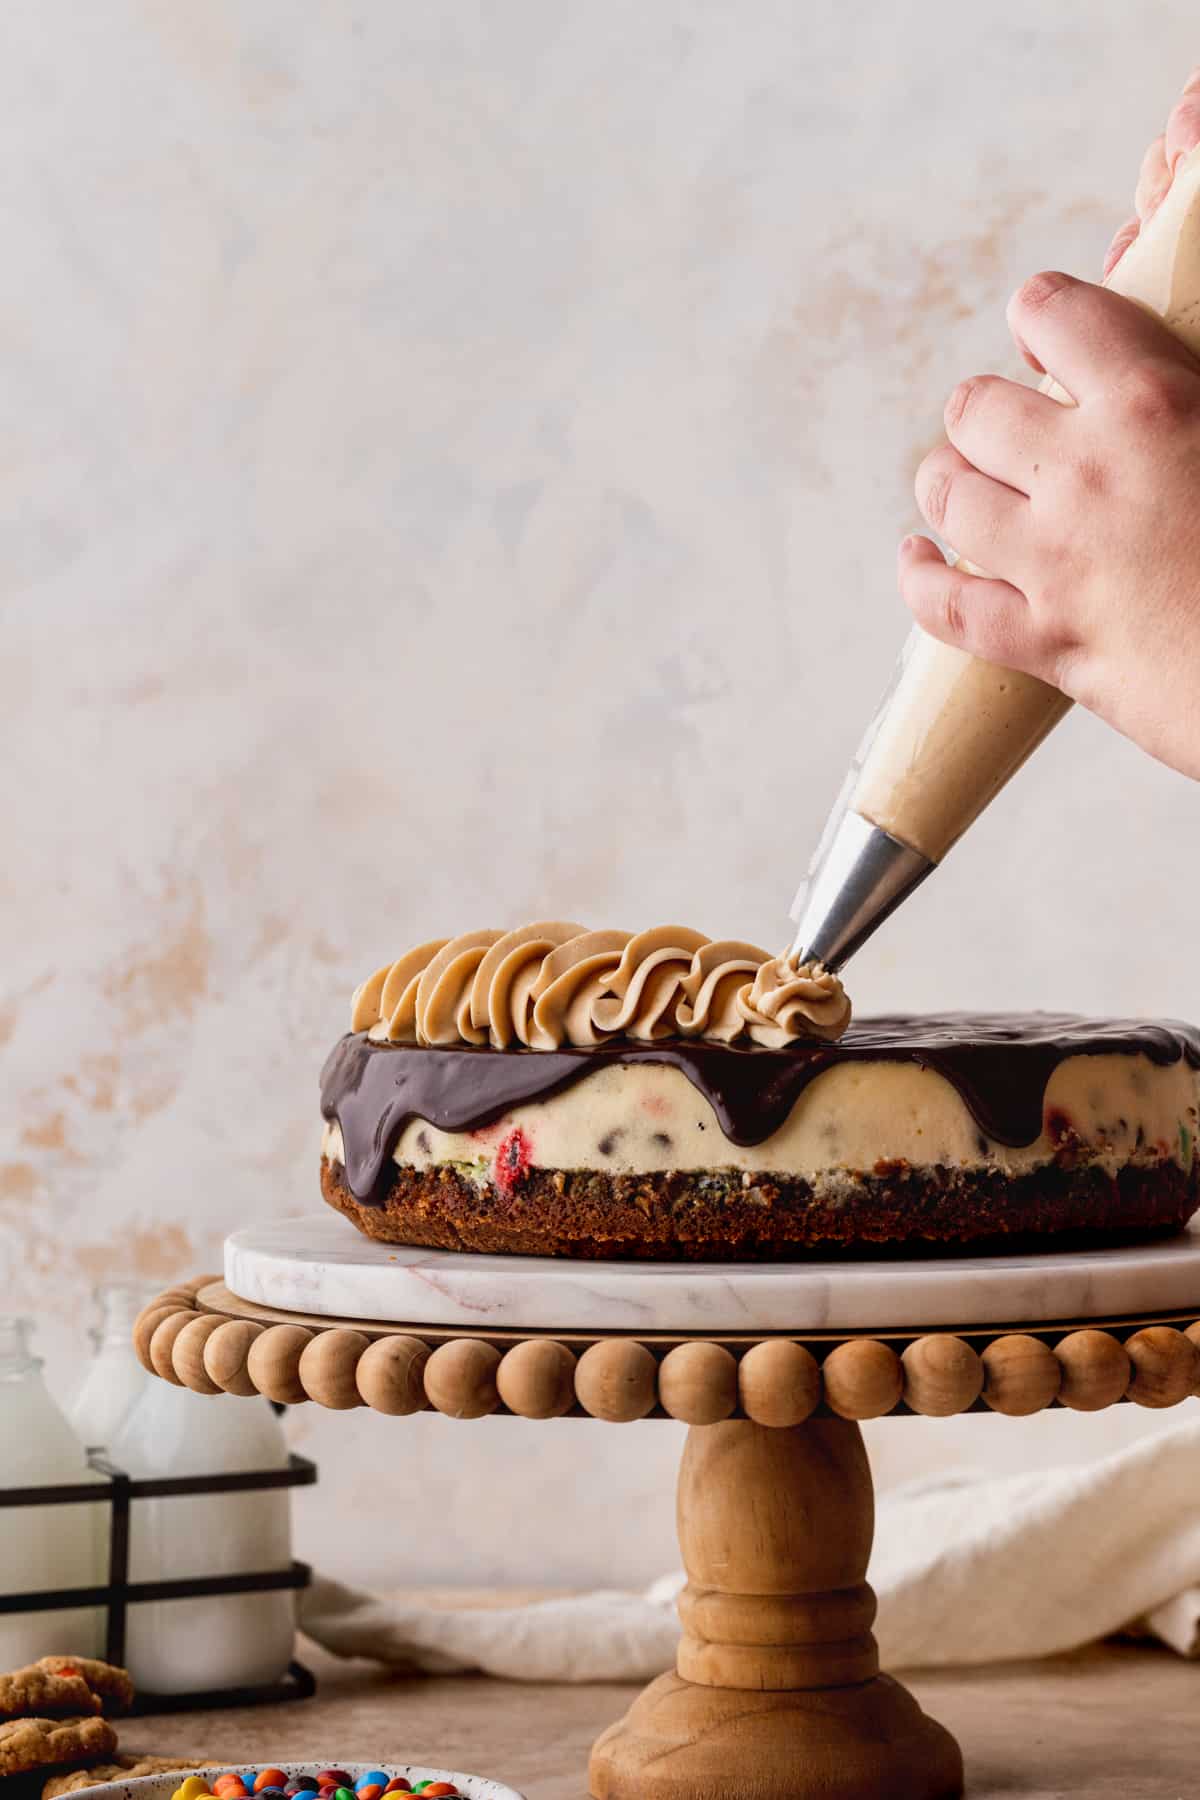 Piping peanut butter frosting on cheesecake.